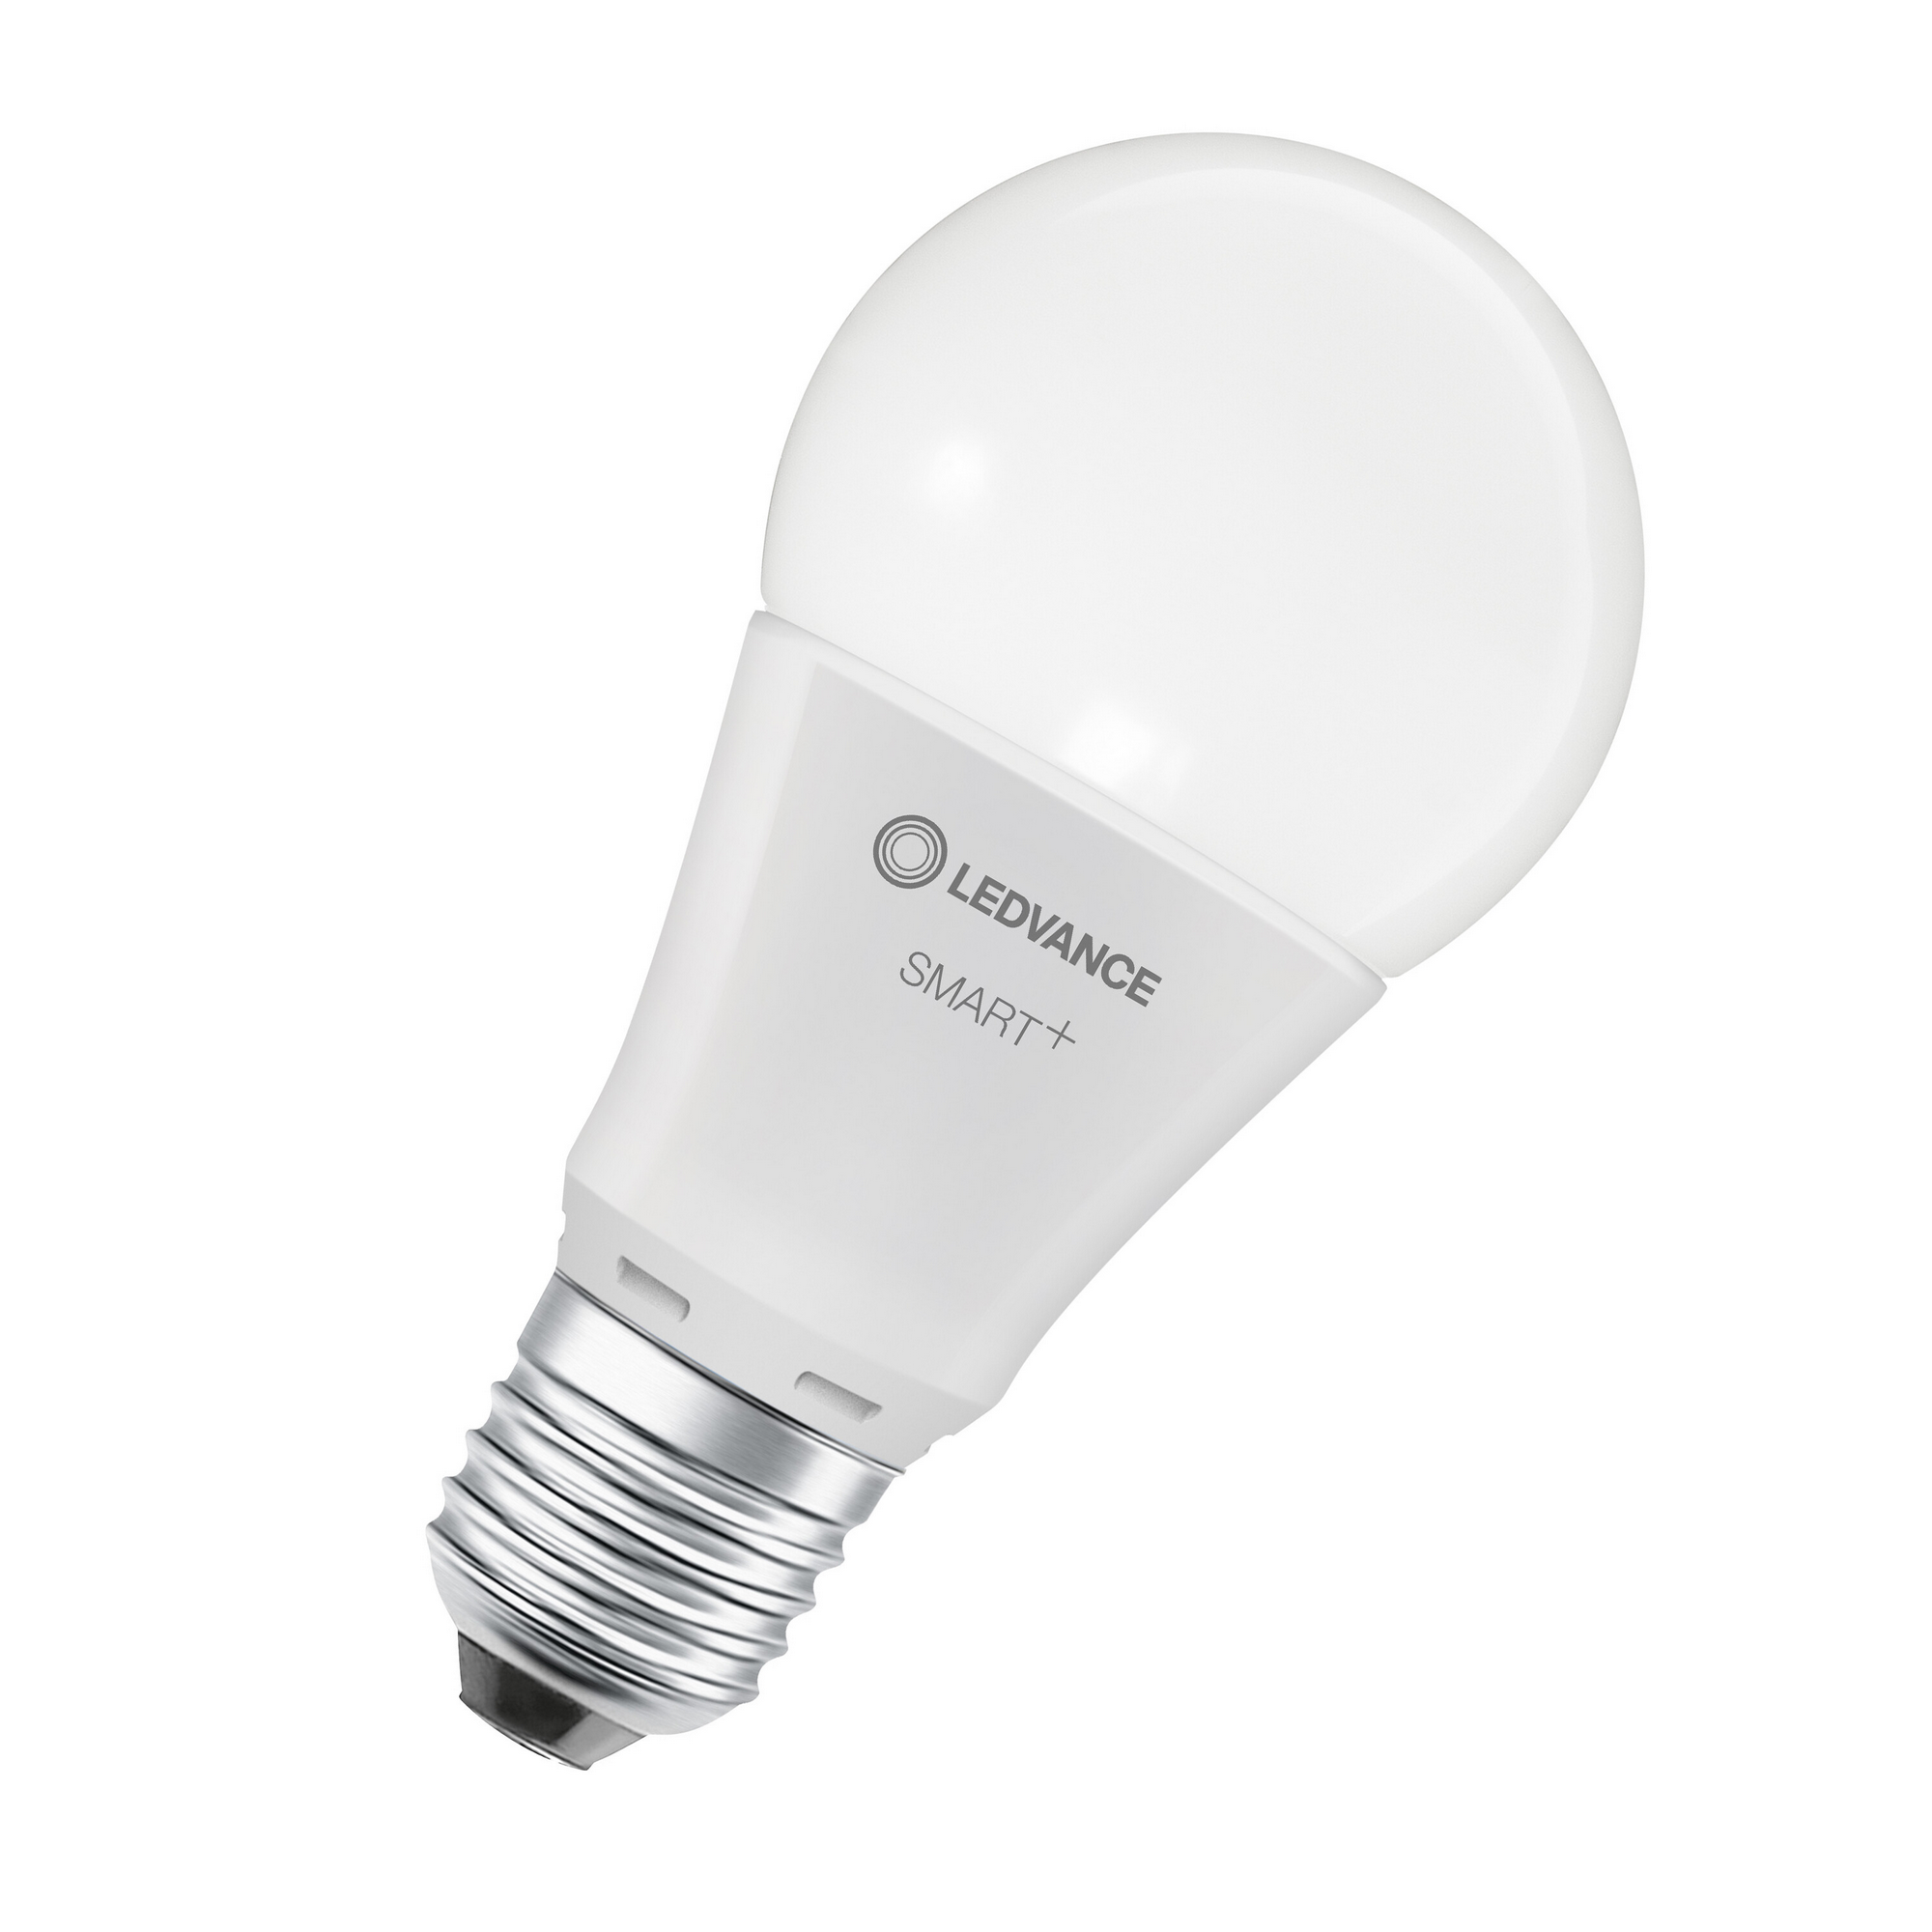 LED-Lampe 'Smart+ WiFi CLA' warmweiß 9 W E27 806 lm, dimmbar 3er-Pack + product picture